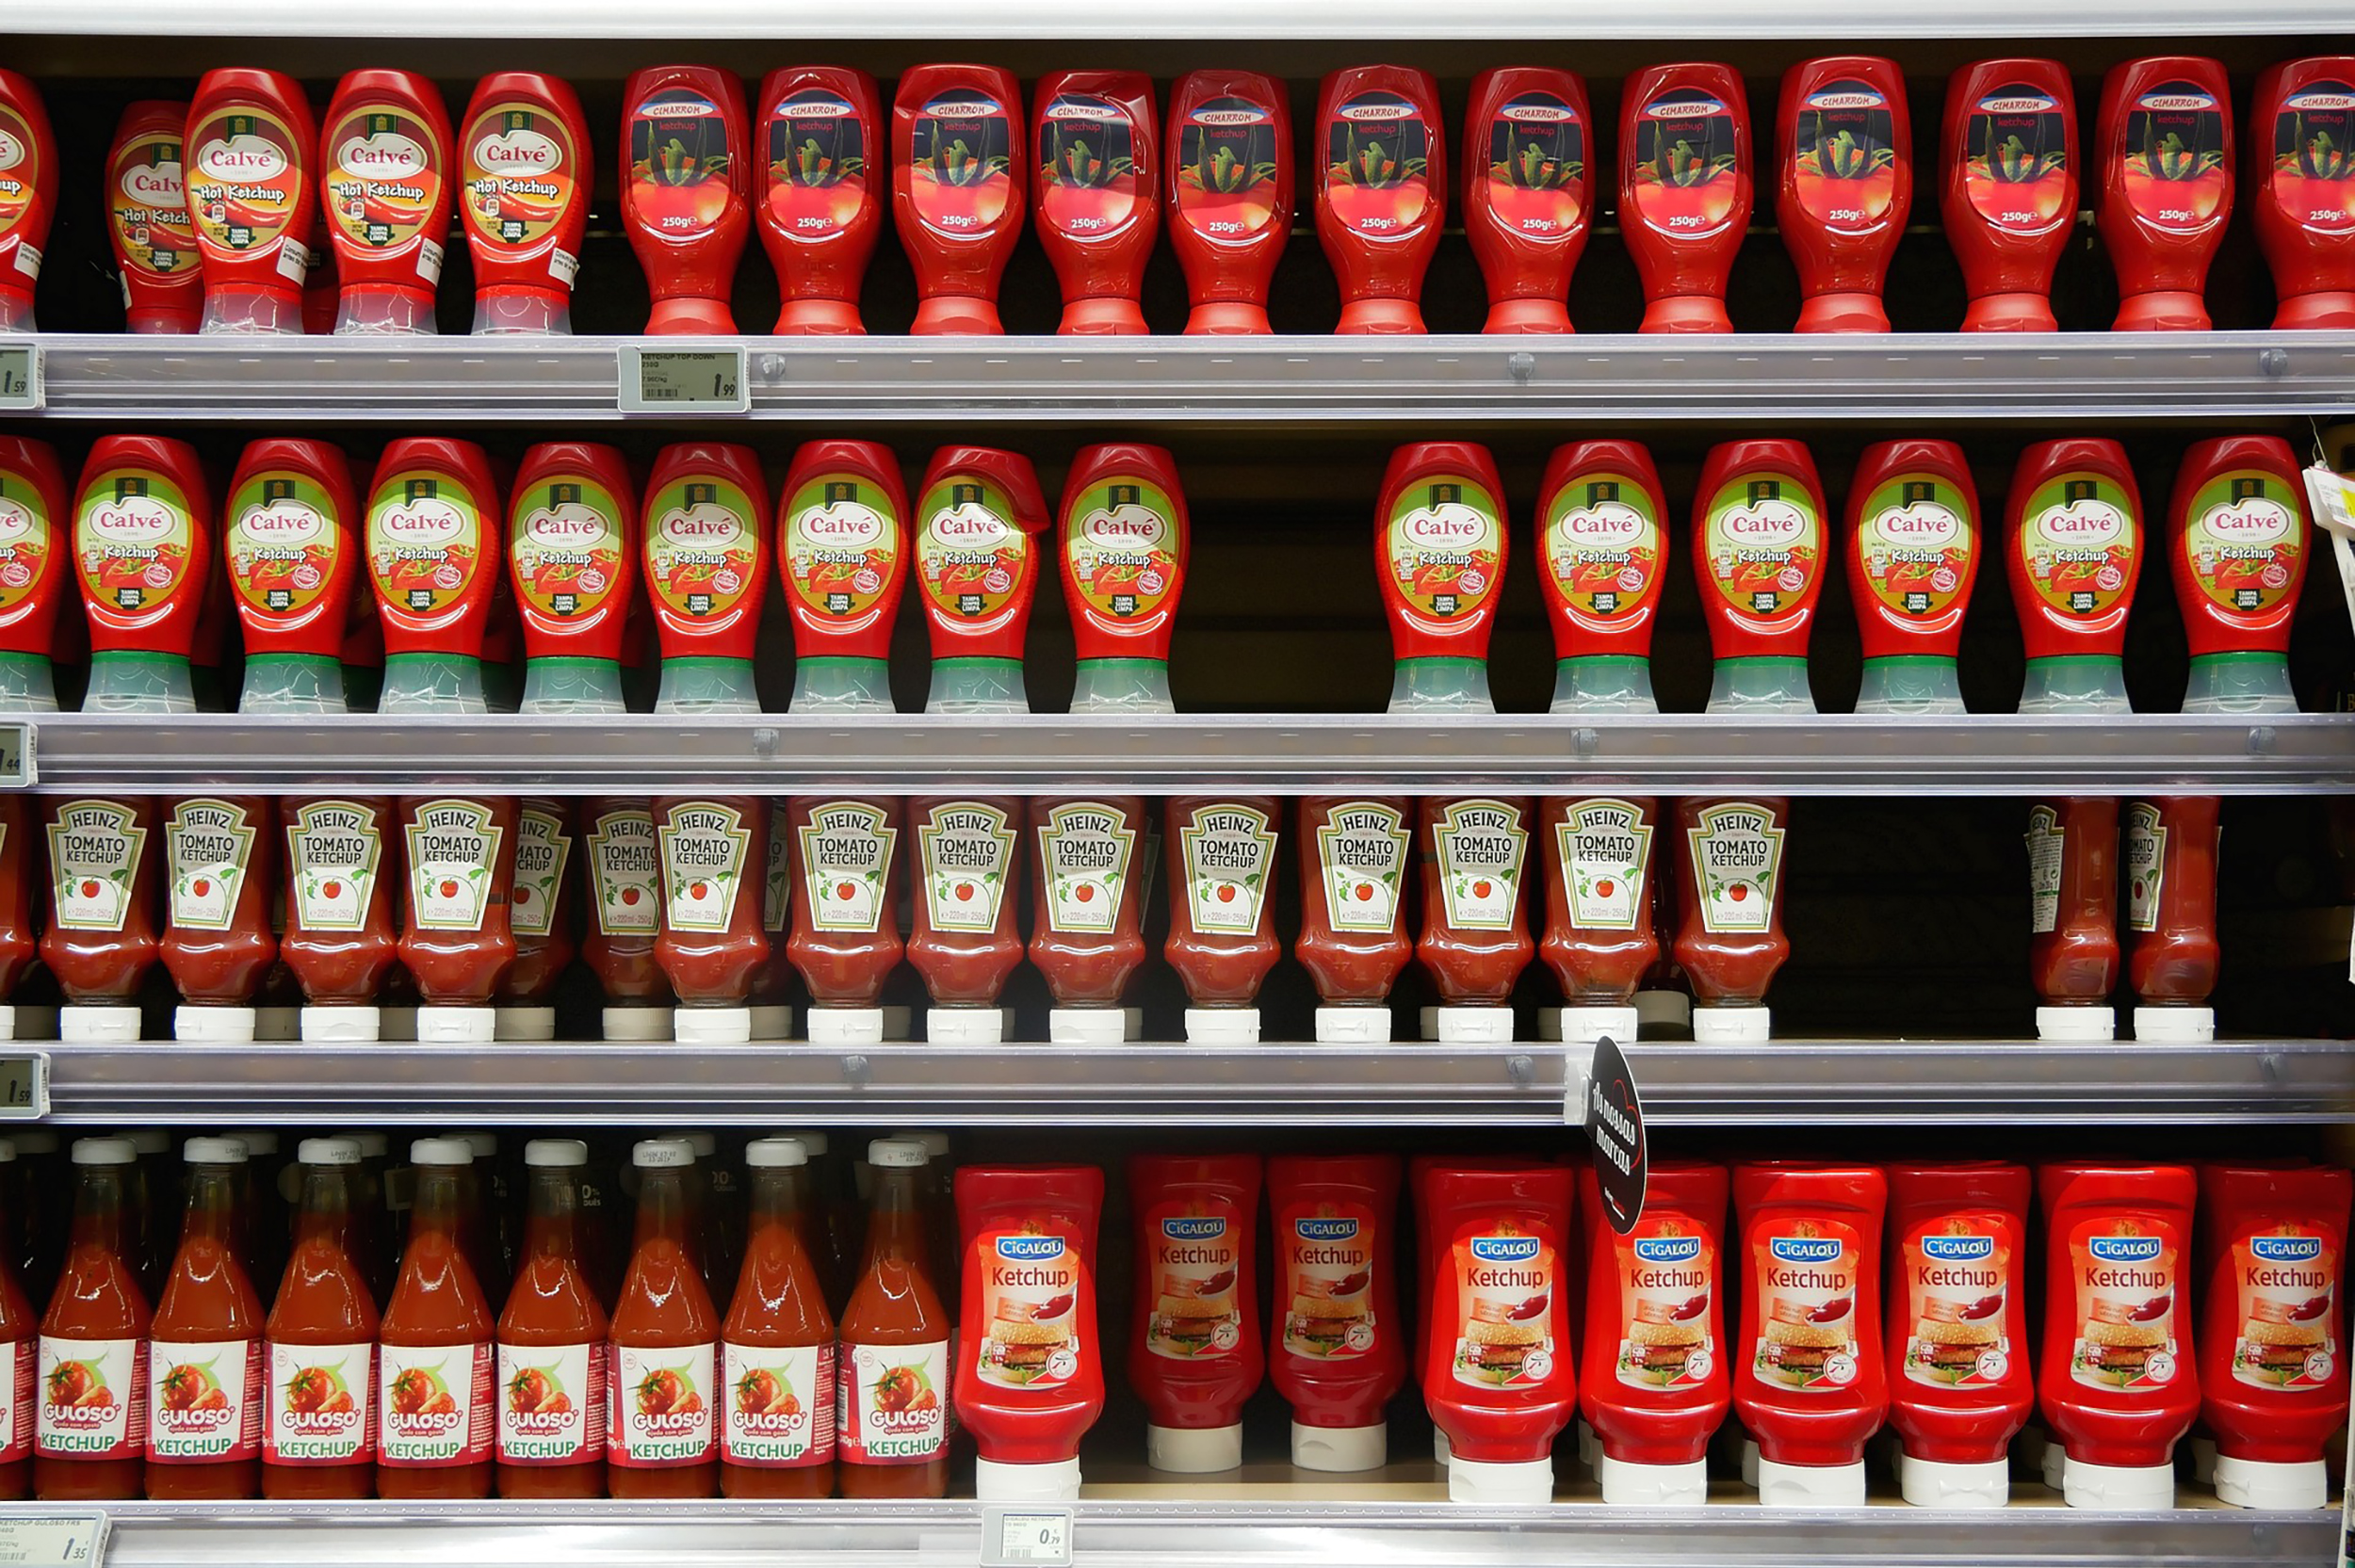 Shelf with Ketchup